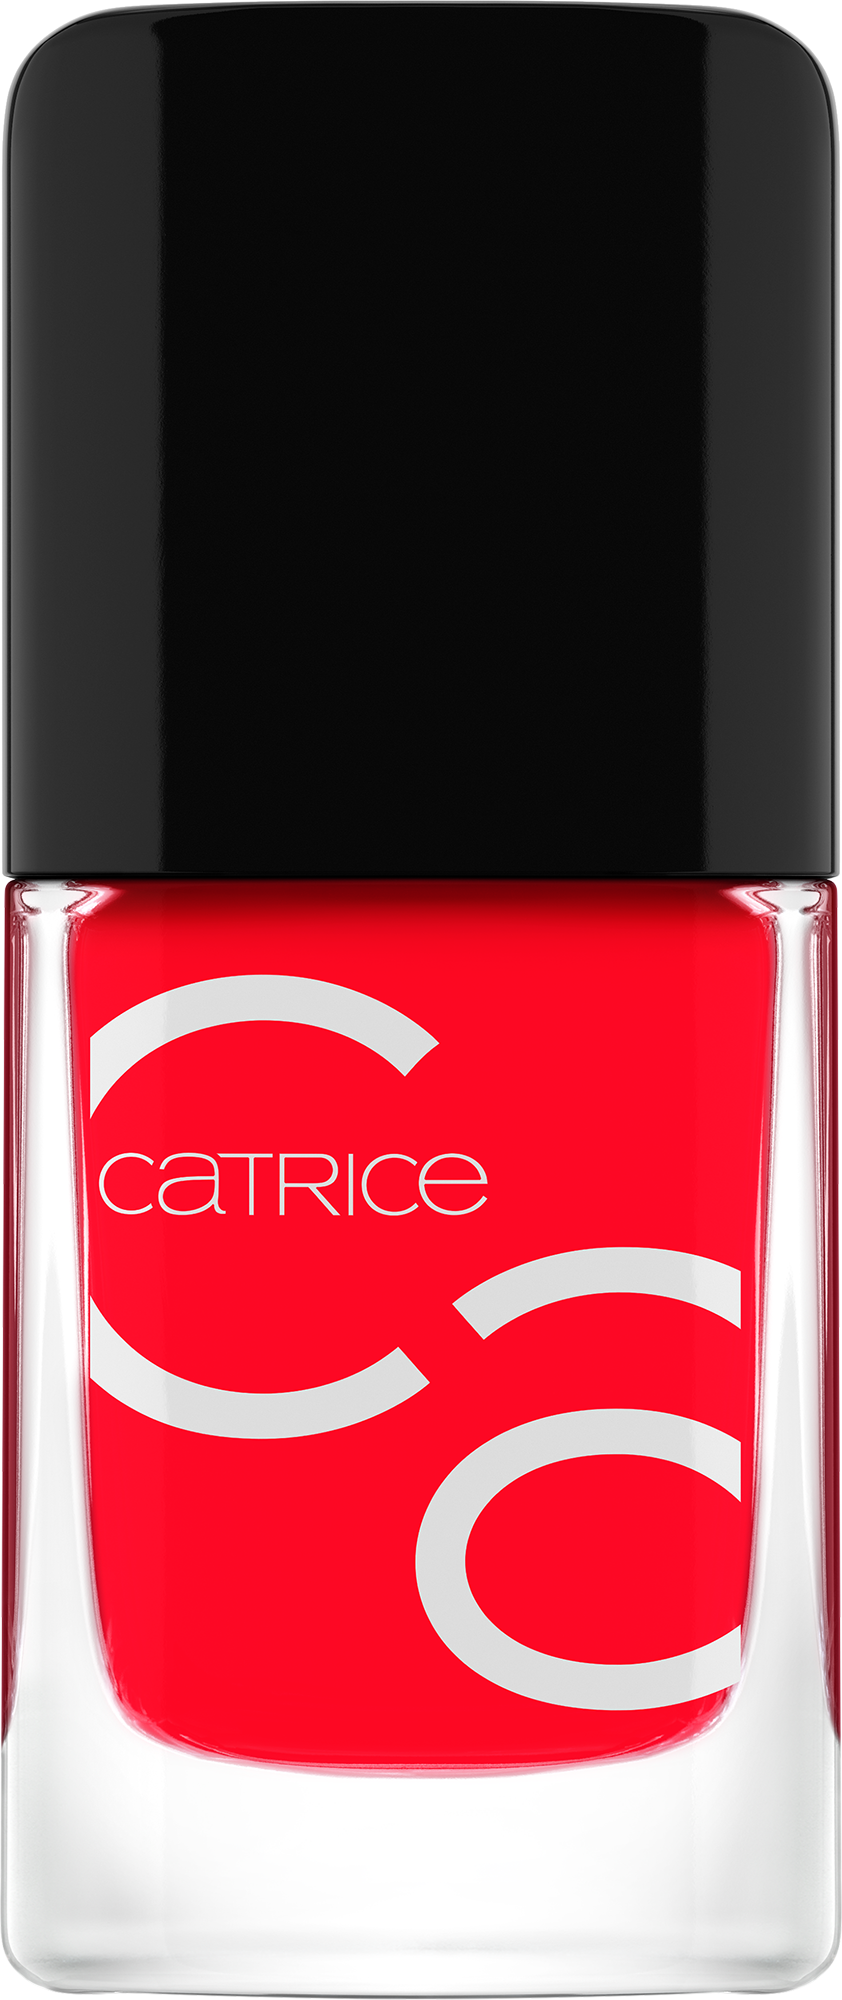 CATRICE ICONAILS vernis à ongles